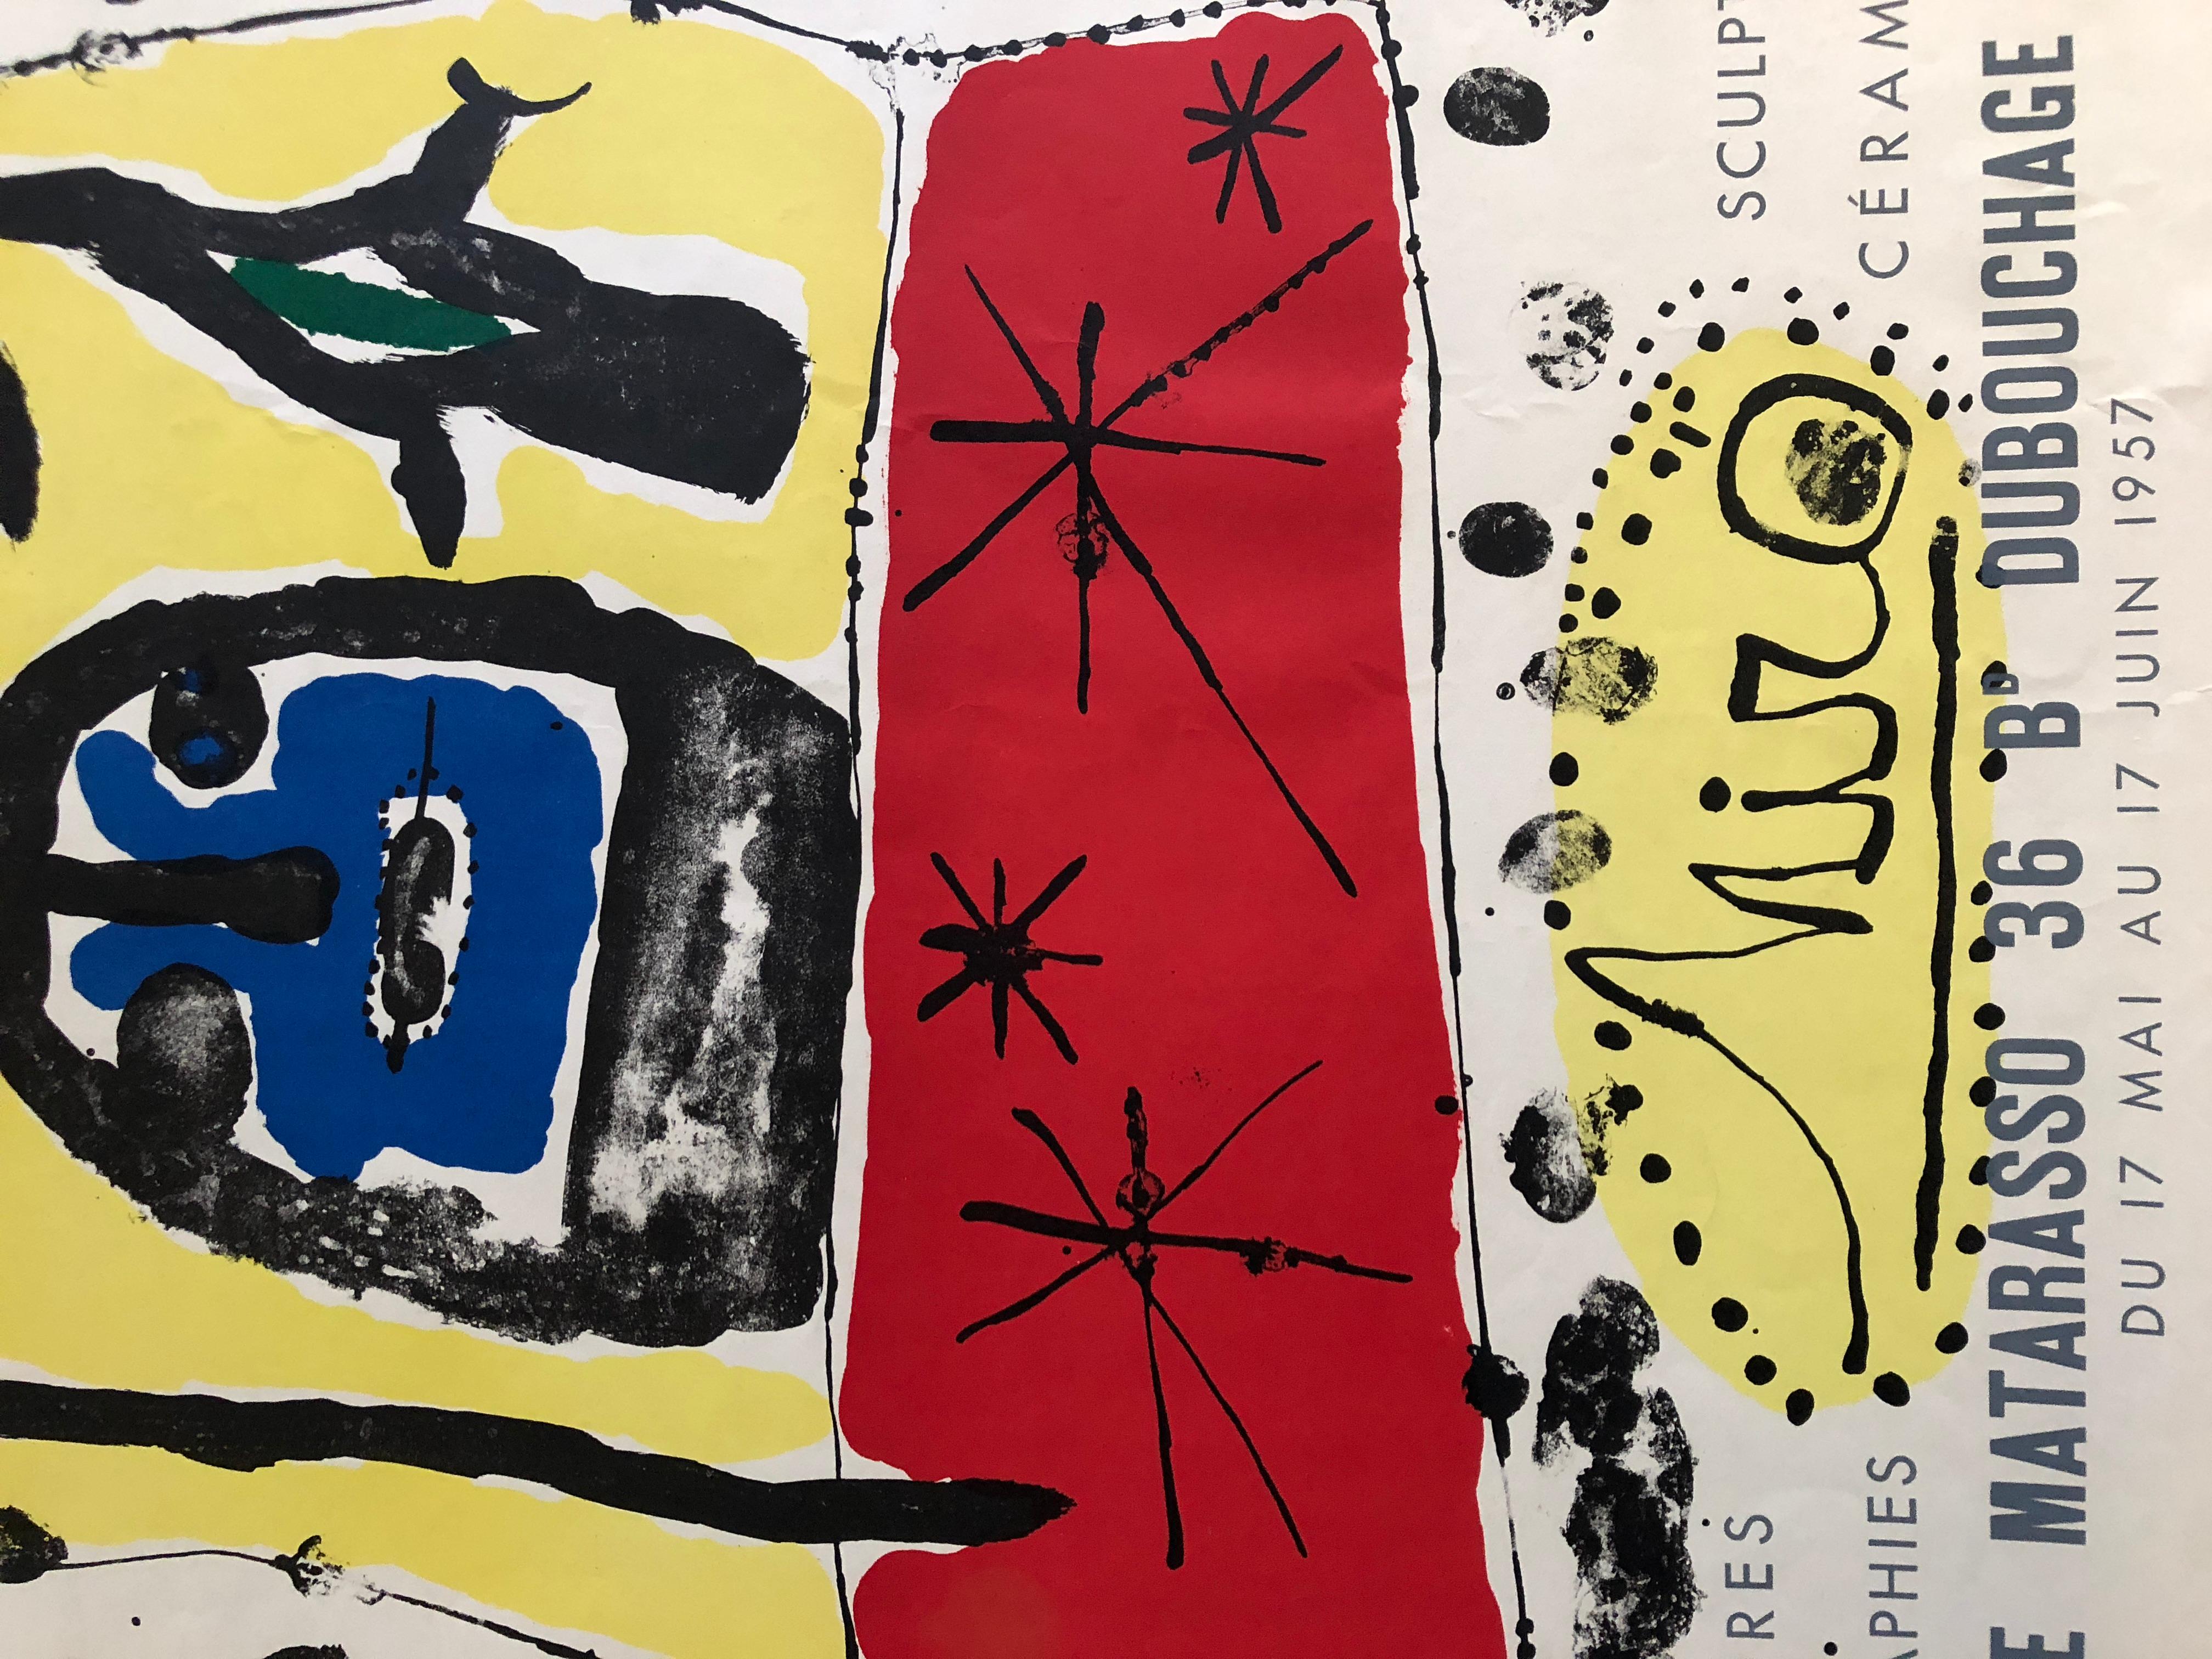 French Galerie Matarasso, 1957, Joan Miró